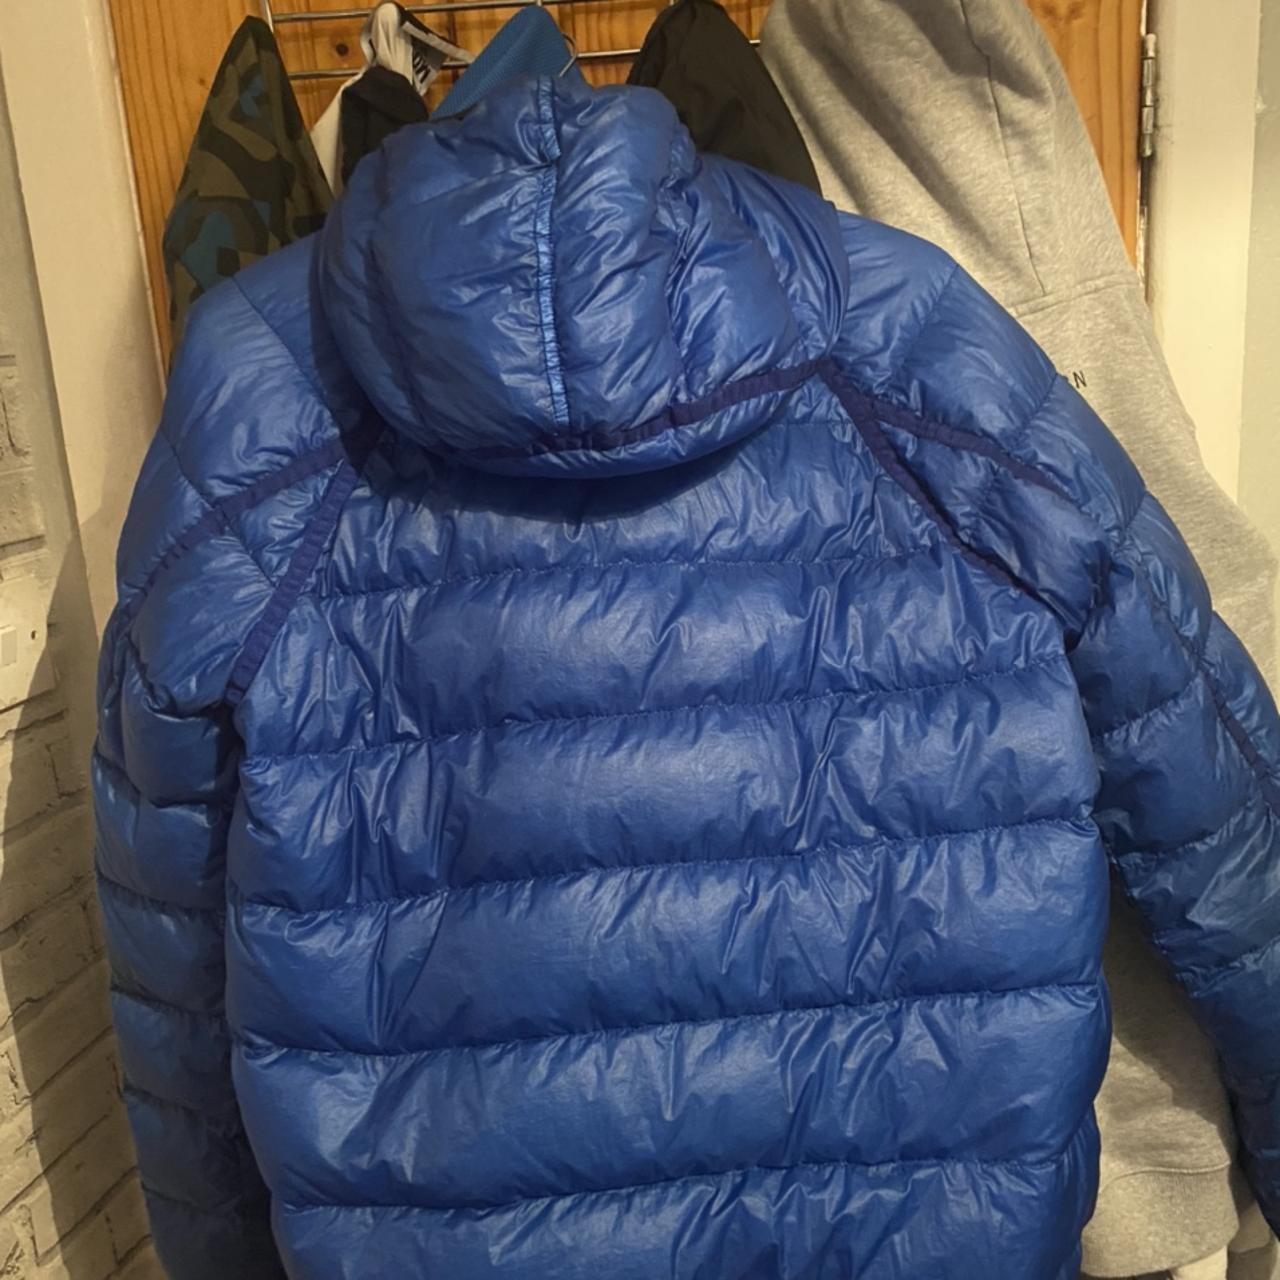 Stone island down jacket in this stunning blue. 100%... - Depop